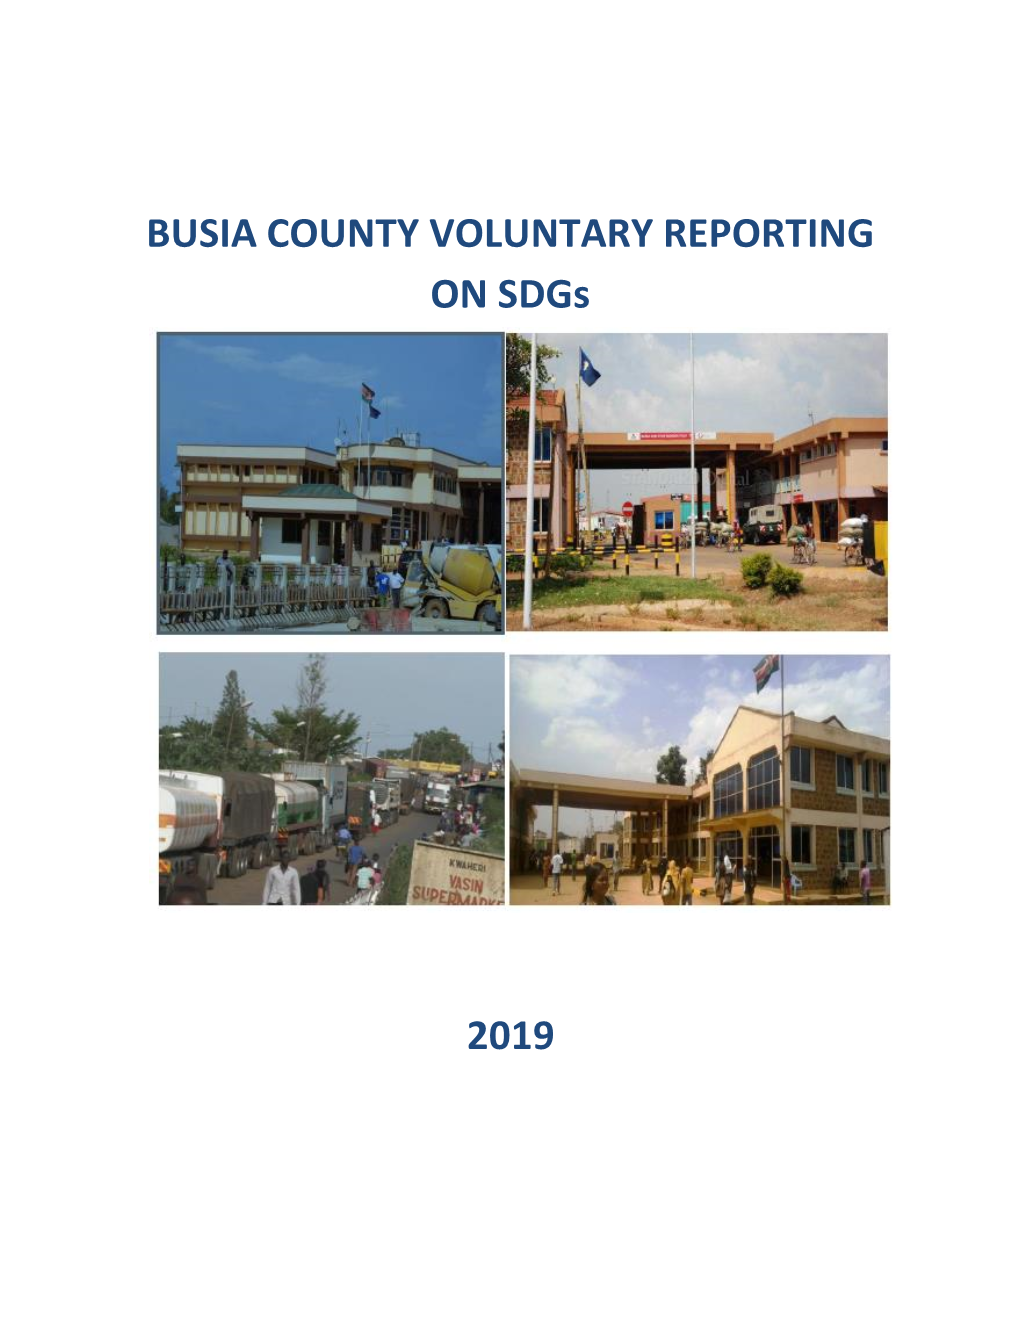 BUSIA COUNTY VOLUNTARY REPORTING on Sdgs